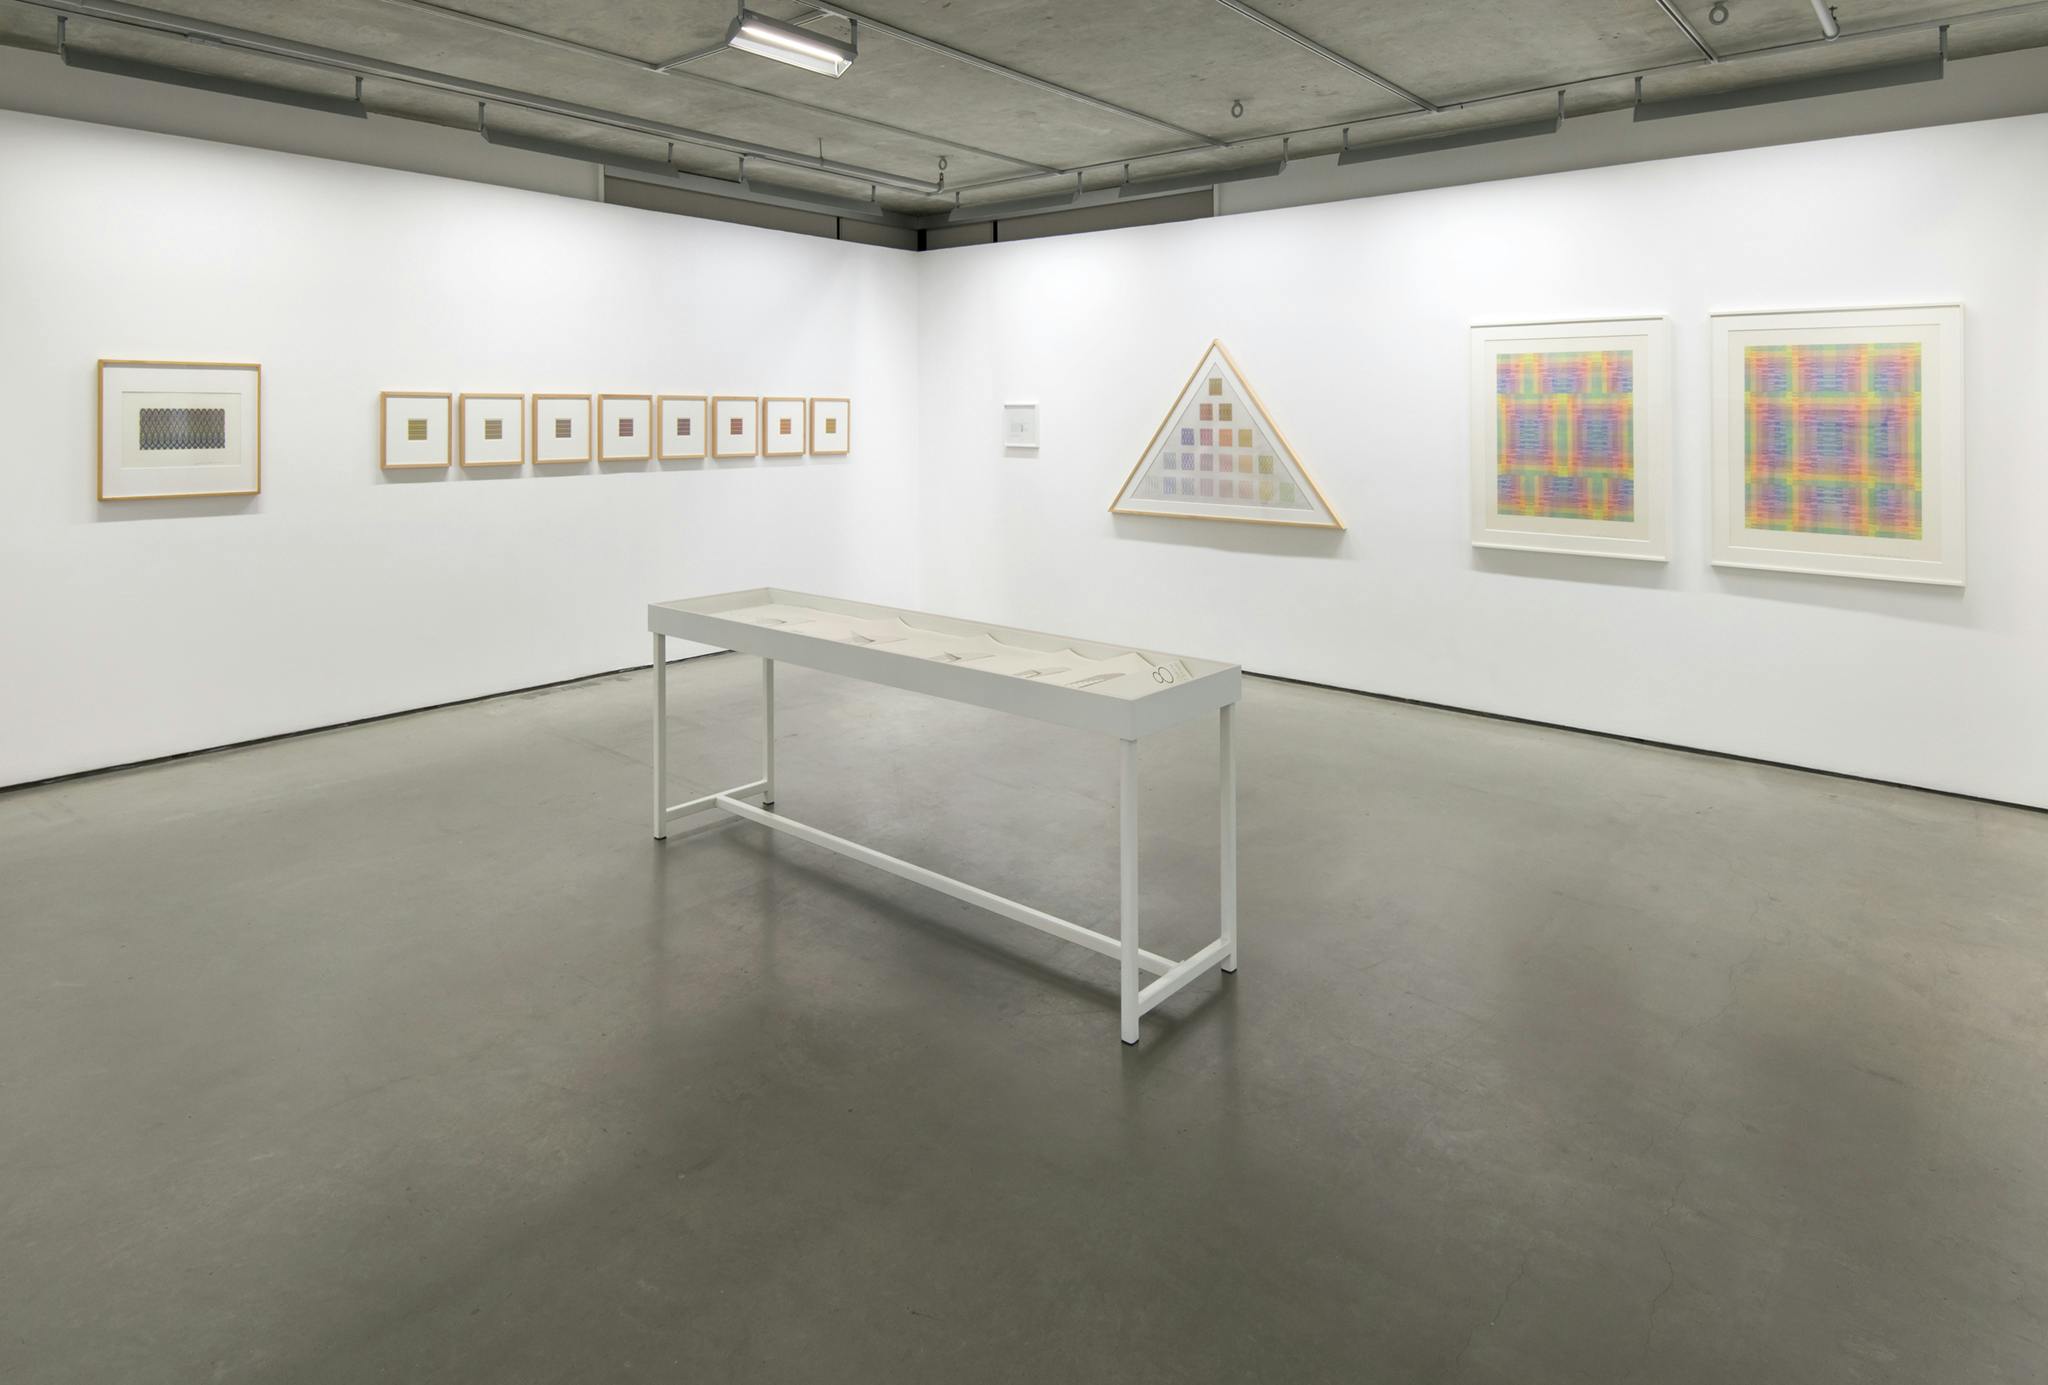 An installation image of artist Channa Horwitz’s exhibition at CAG. Thirteen framed drawings of varying size and shape hang on the wall. A display vitrine sits in the center of the room. 